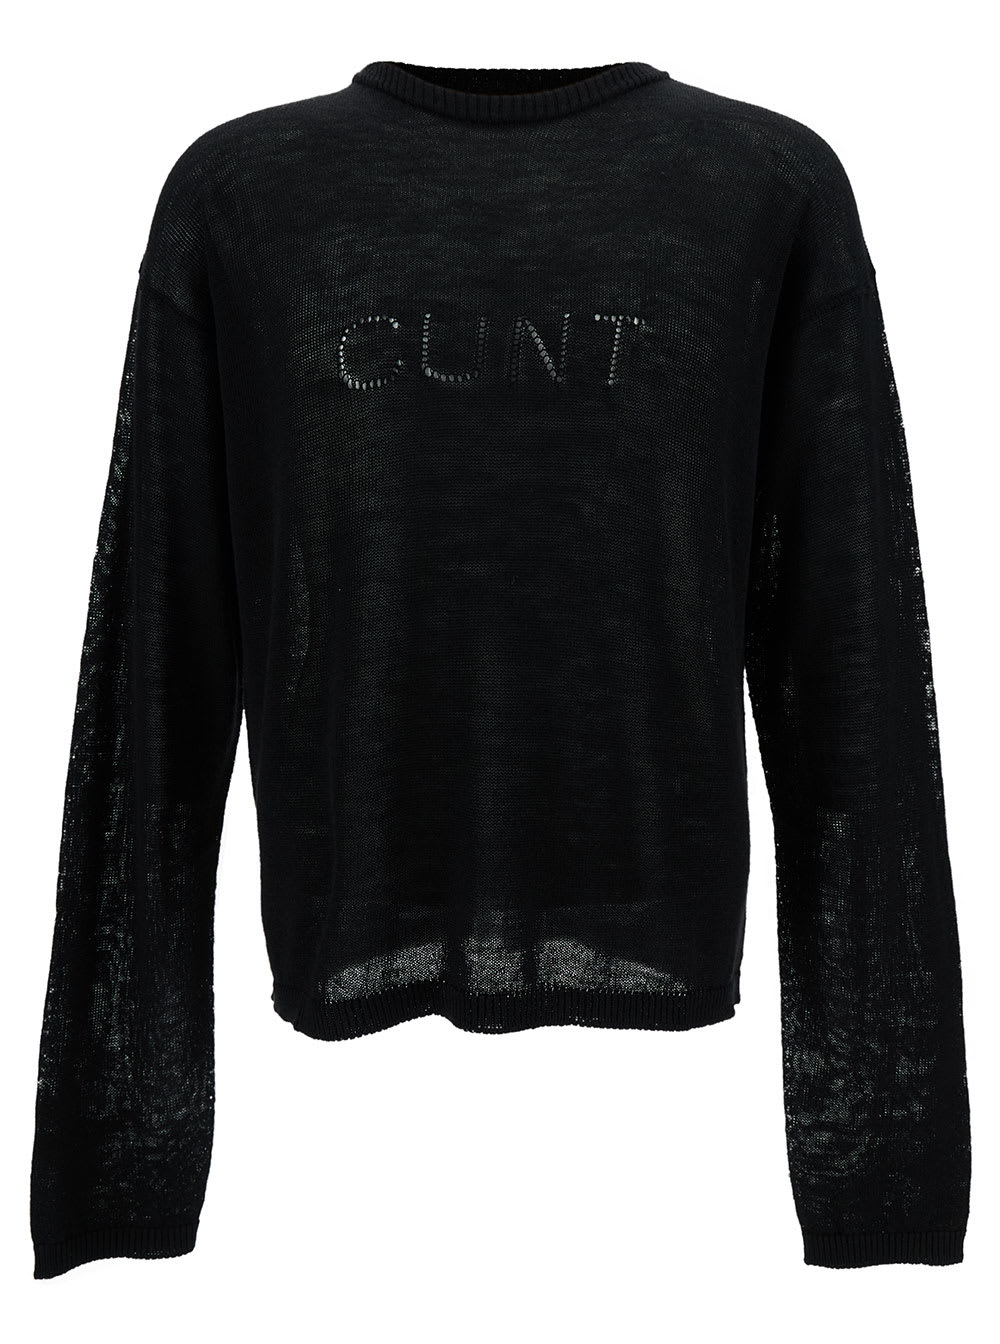 Black Long Sleeve Top With Cunt Writing In Wool Man